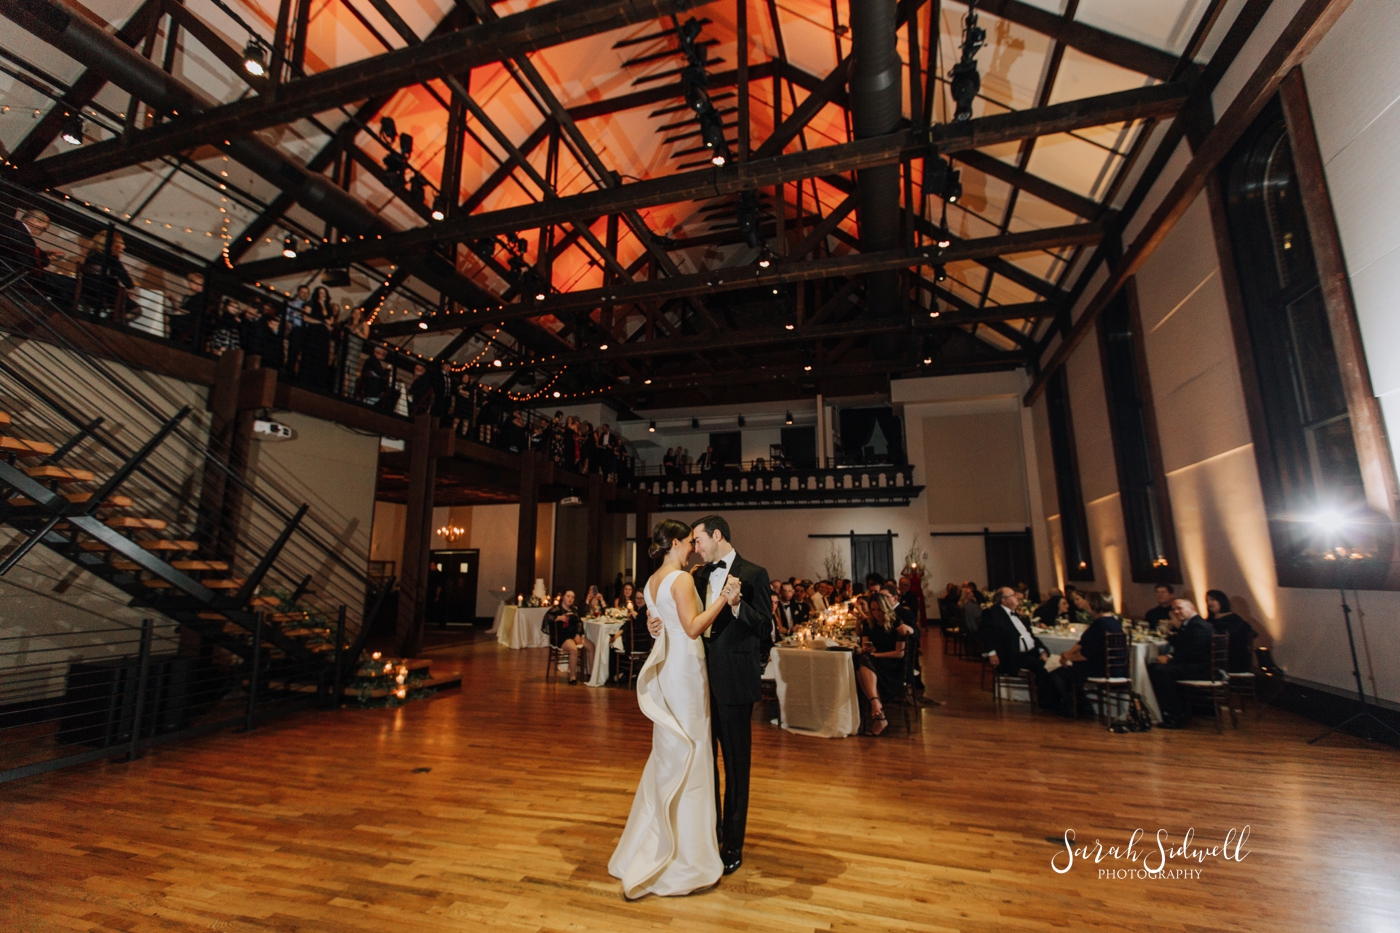 A bride and groom enjoy their first dance | Sarah Sidwell Photography | The Bell Tower